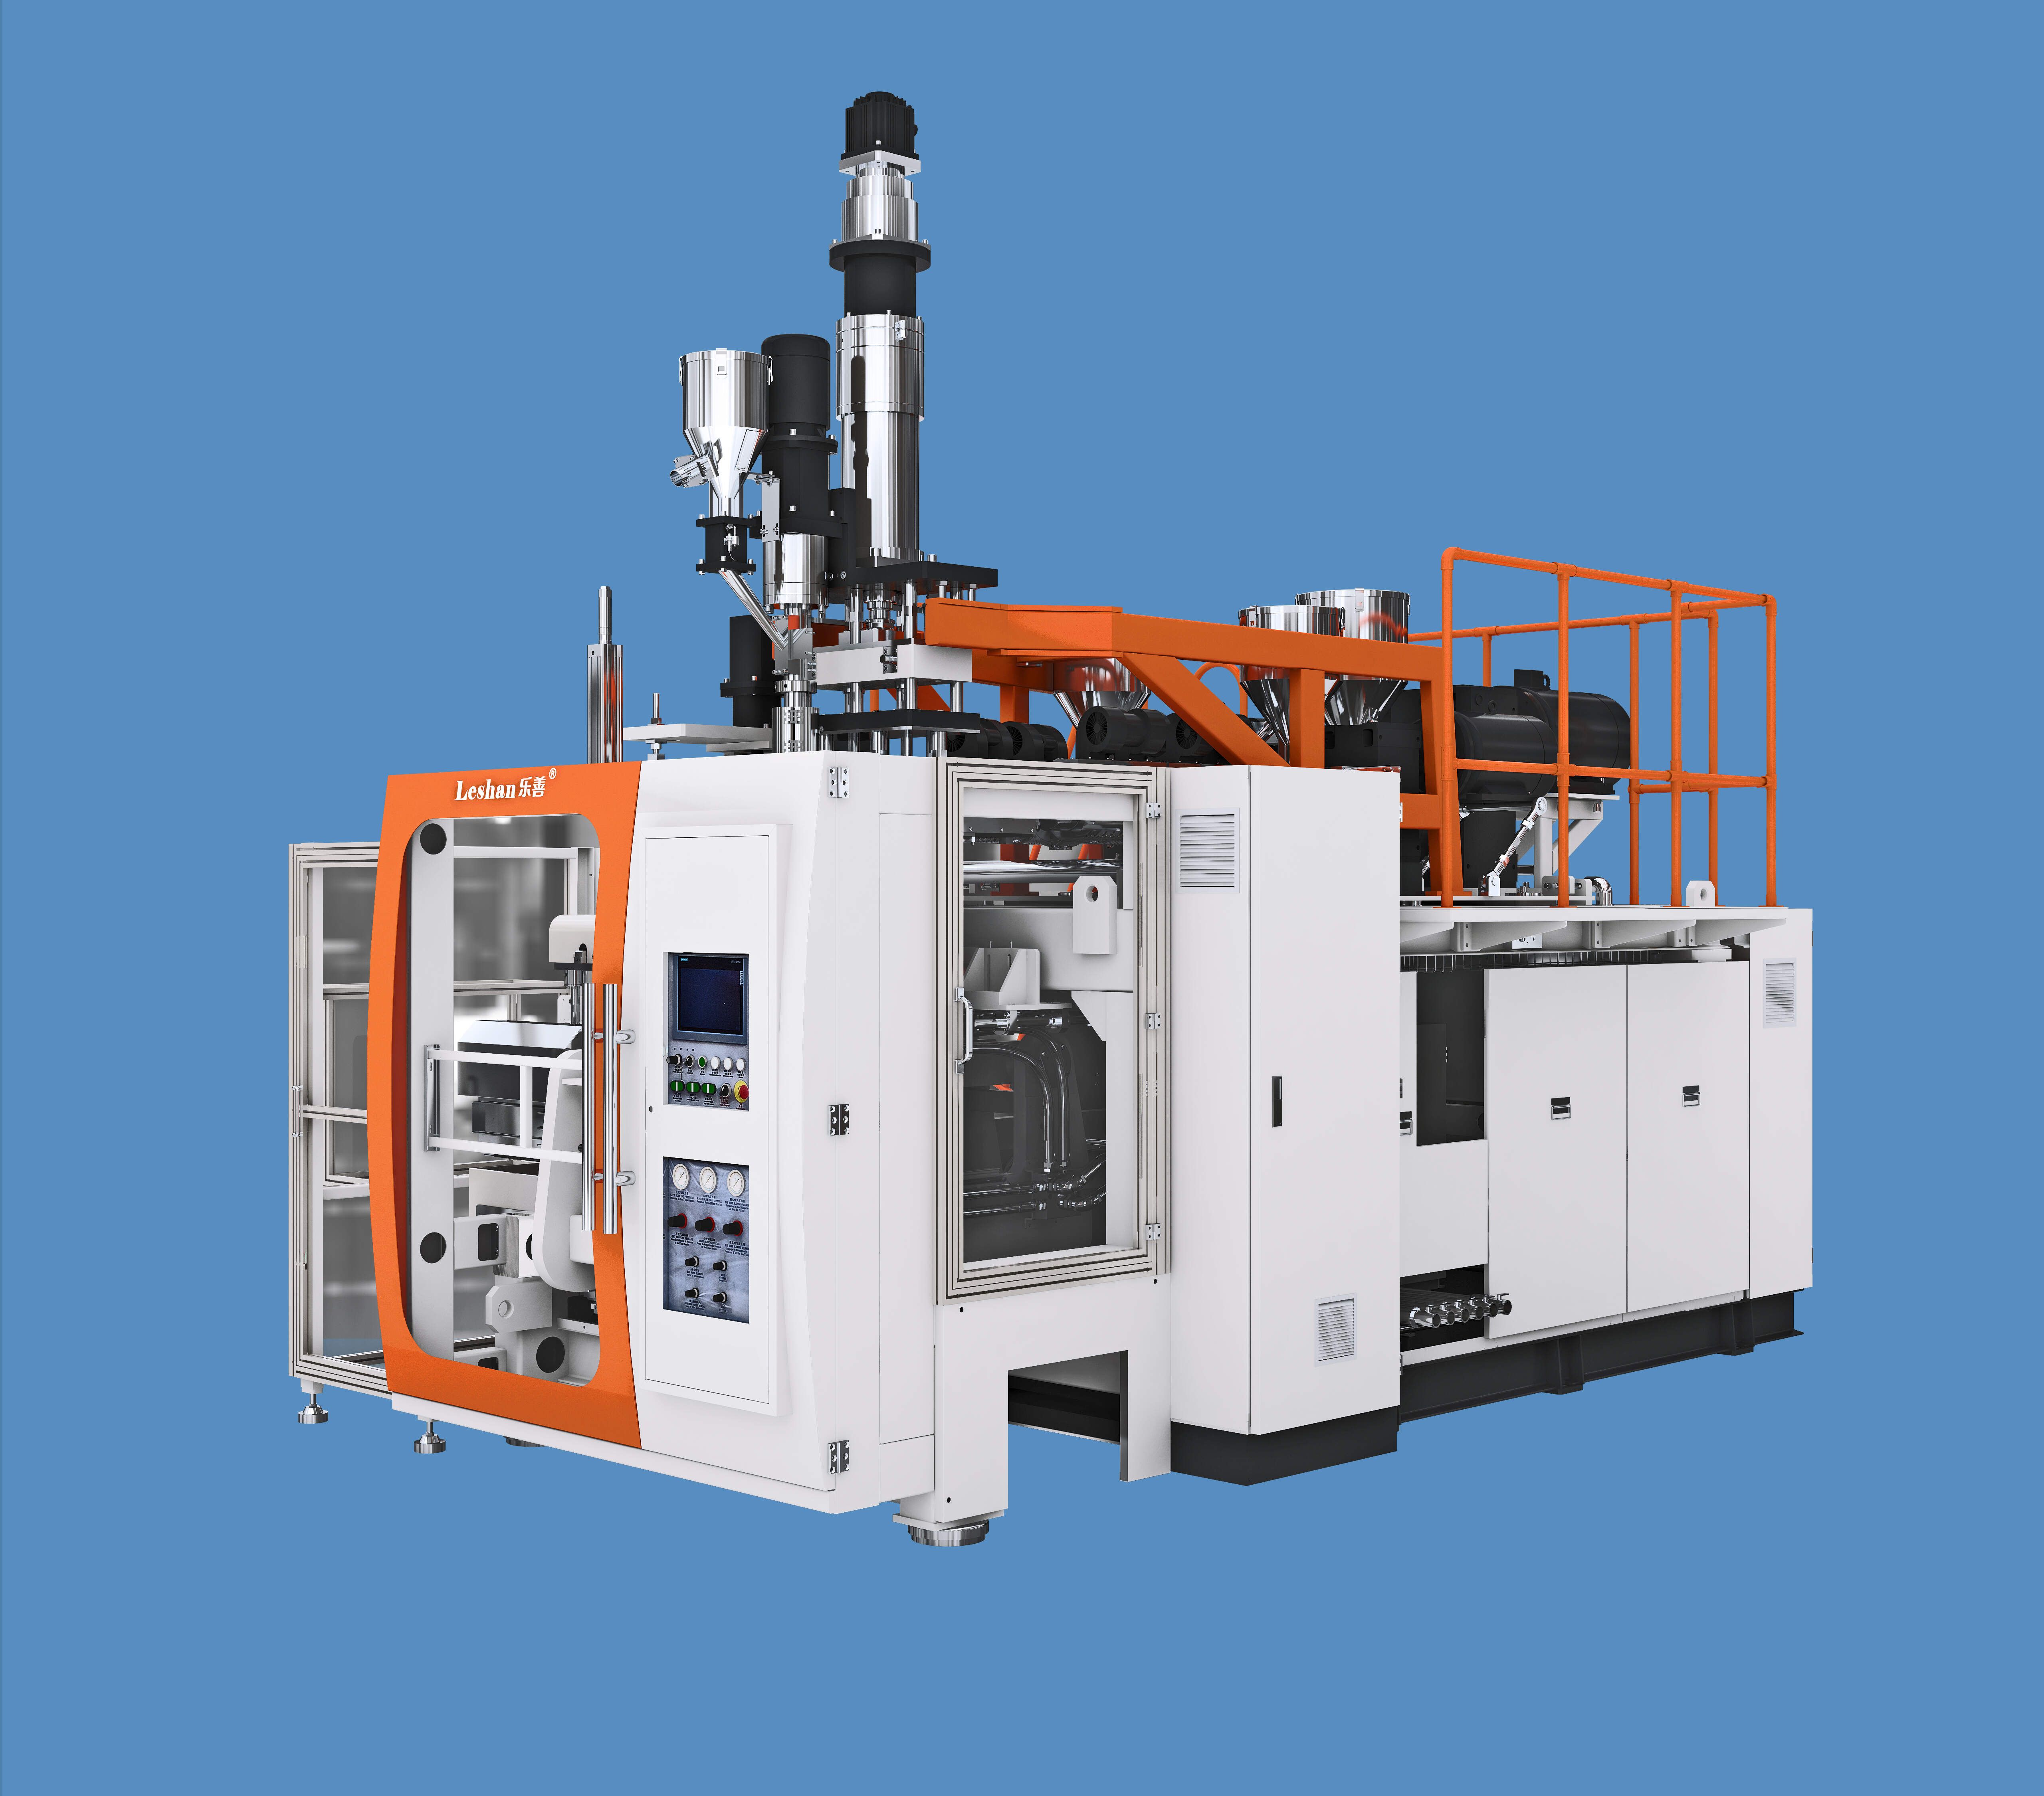 How to choose a suitable extrusion blow machine supplier?